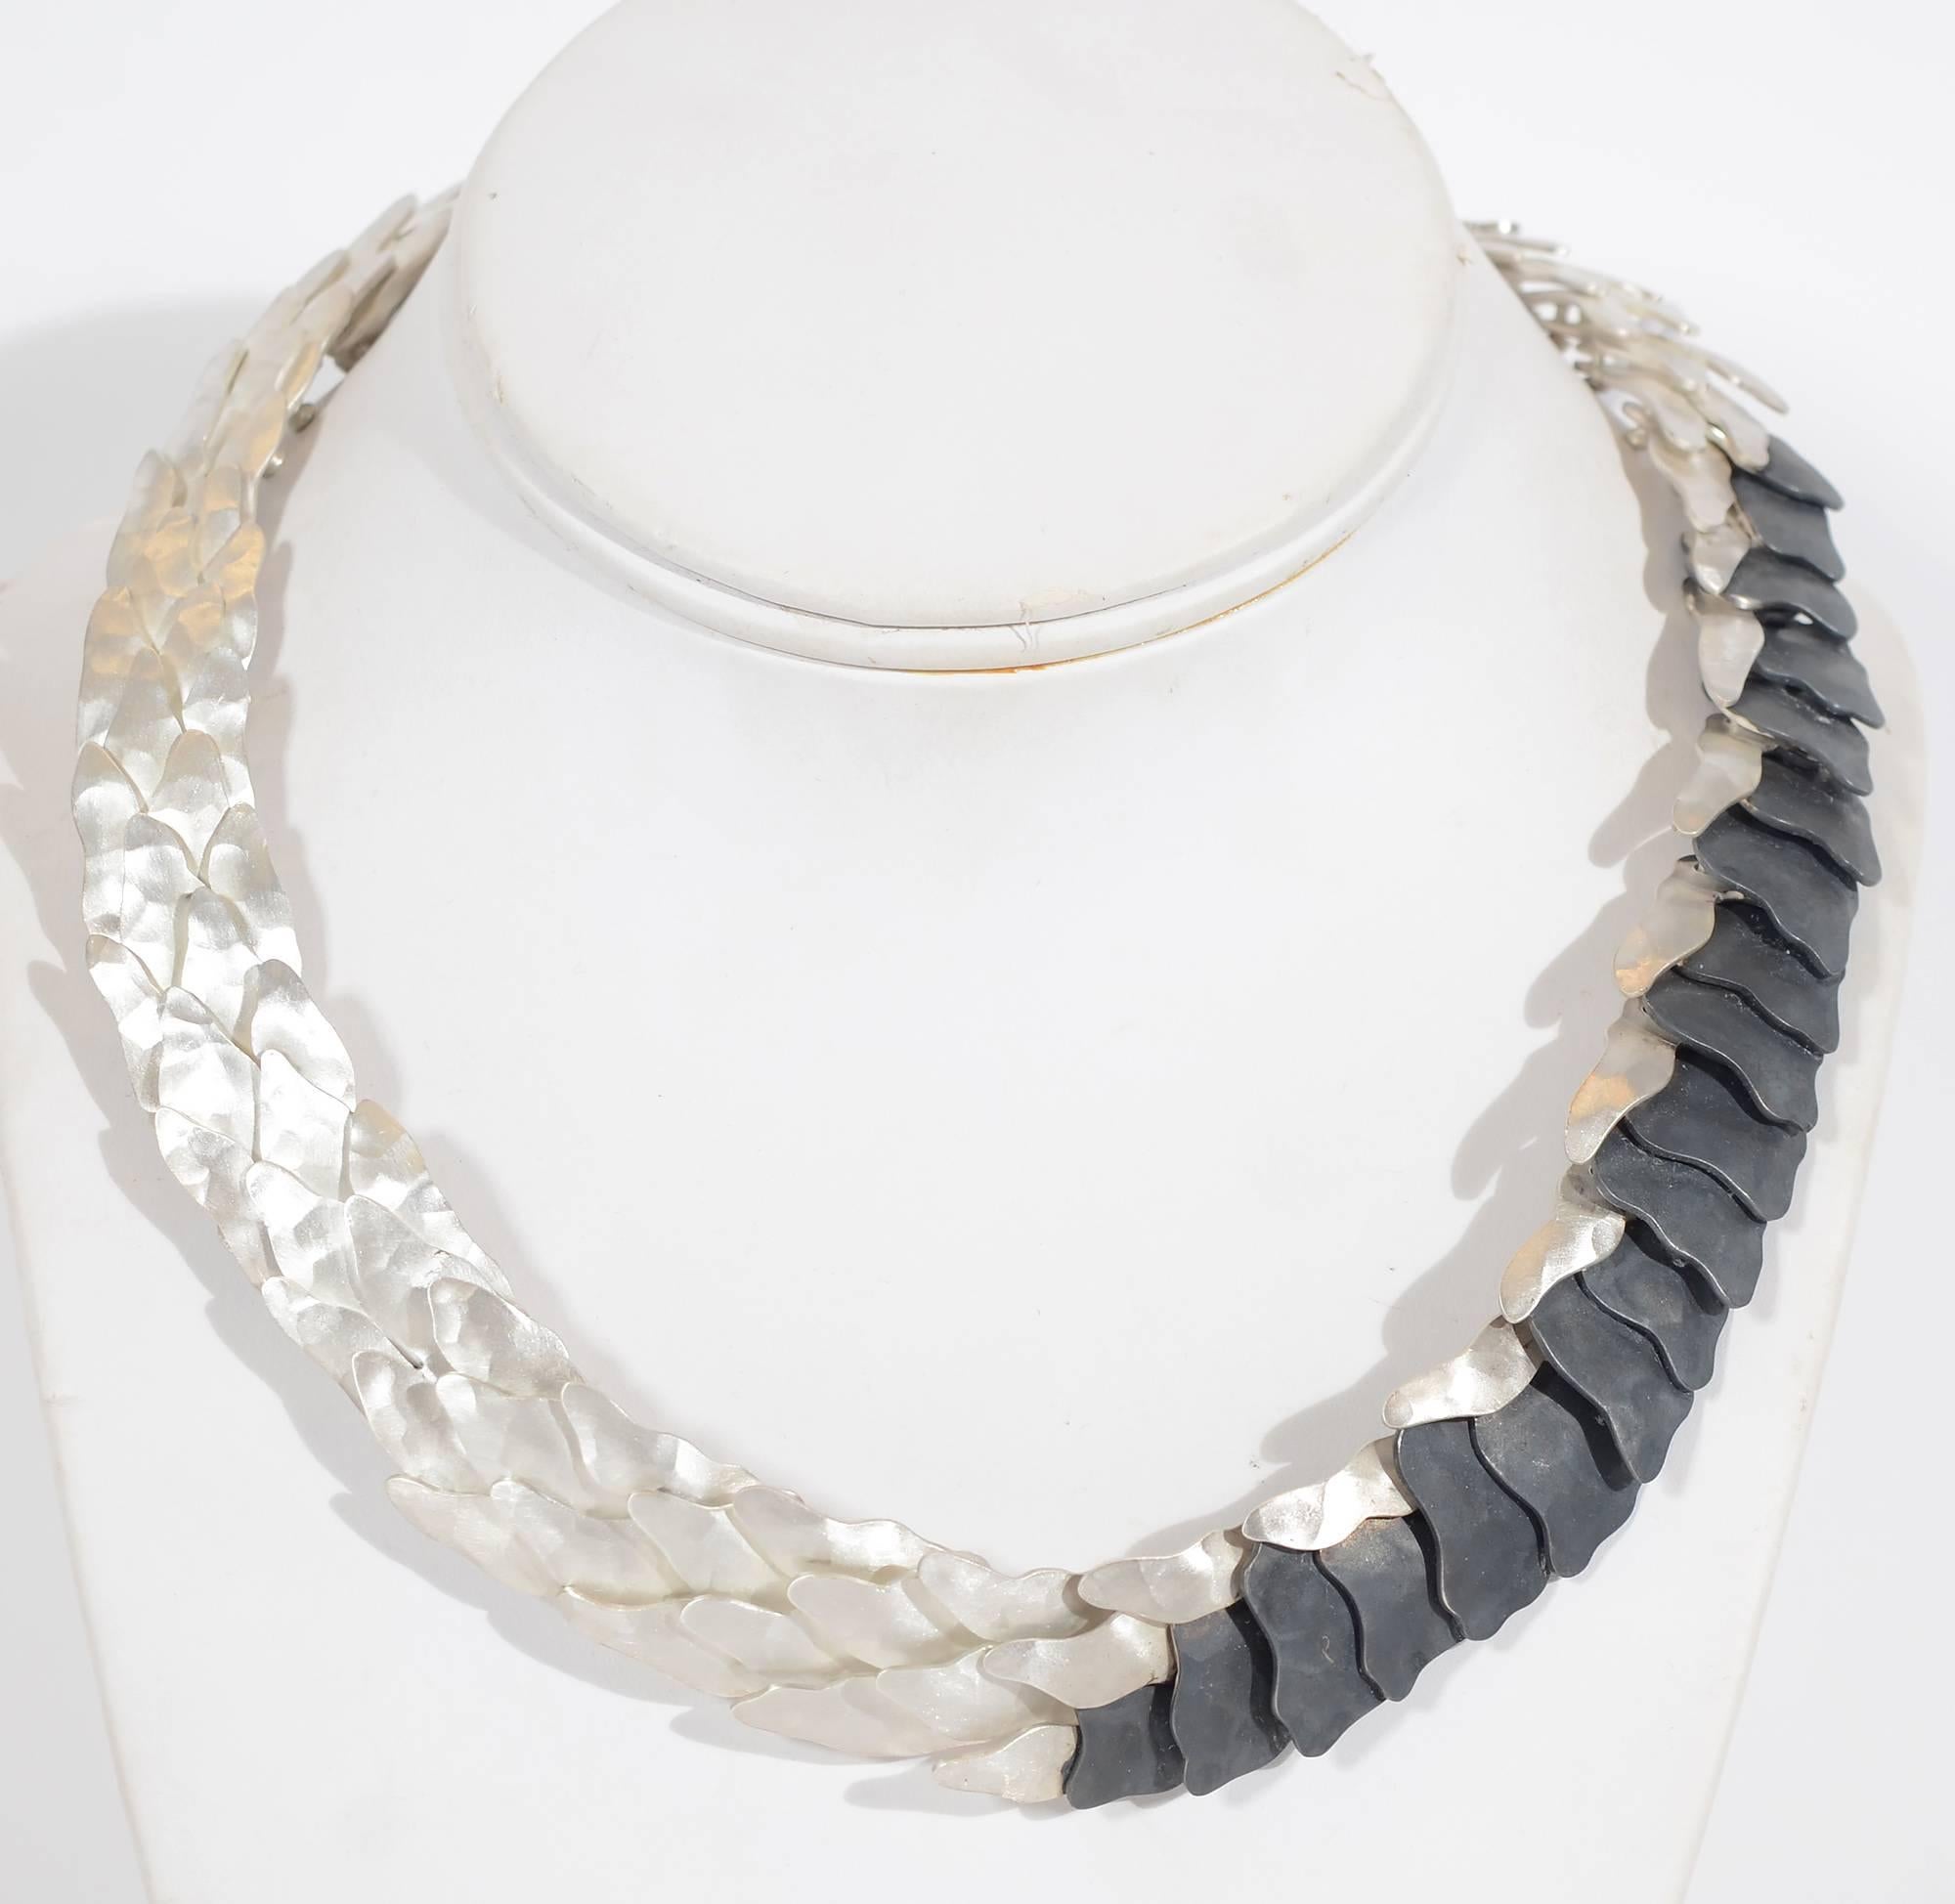 Striking necklace made of two tones of 950 silver, higher quality than sterling. The black has been oxidized to create the dark matte finish.
Overlapping links are assembled with rivets giving lots of movement to the necklace. The darkened part can